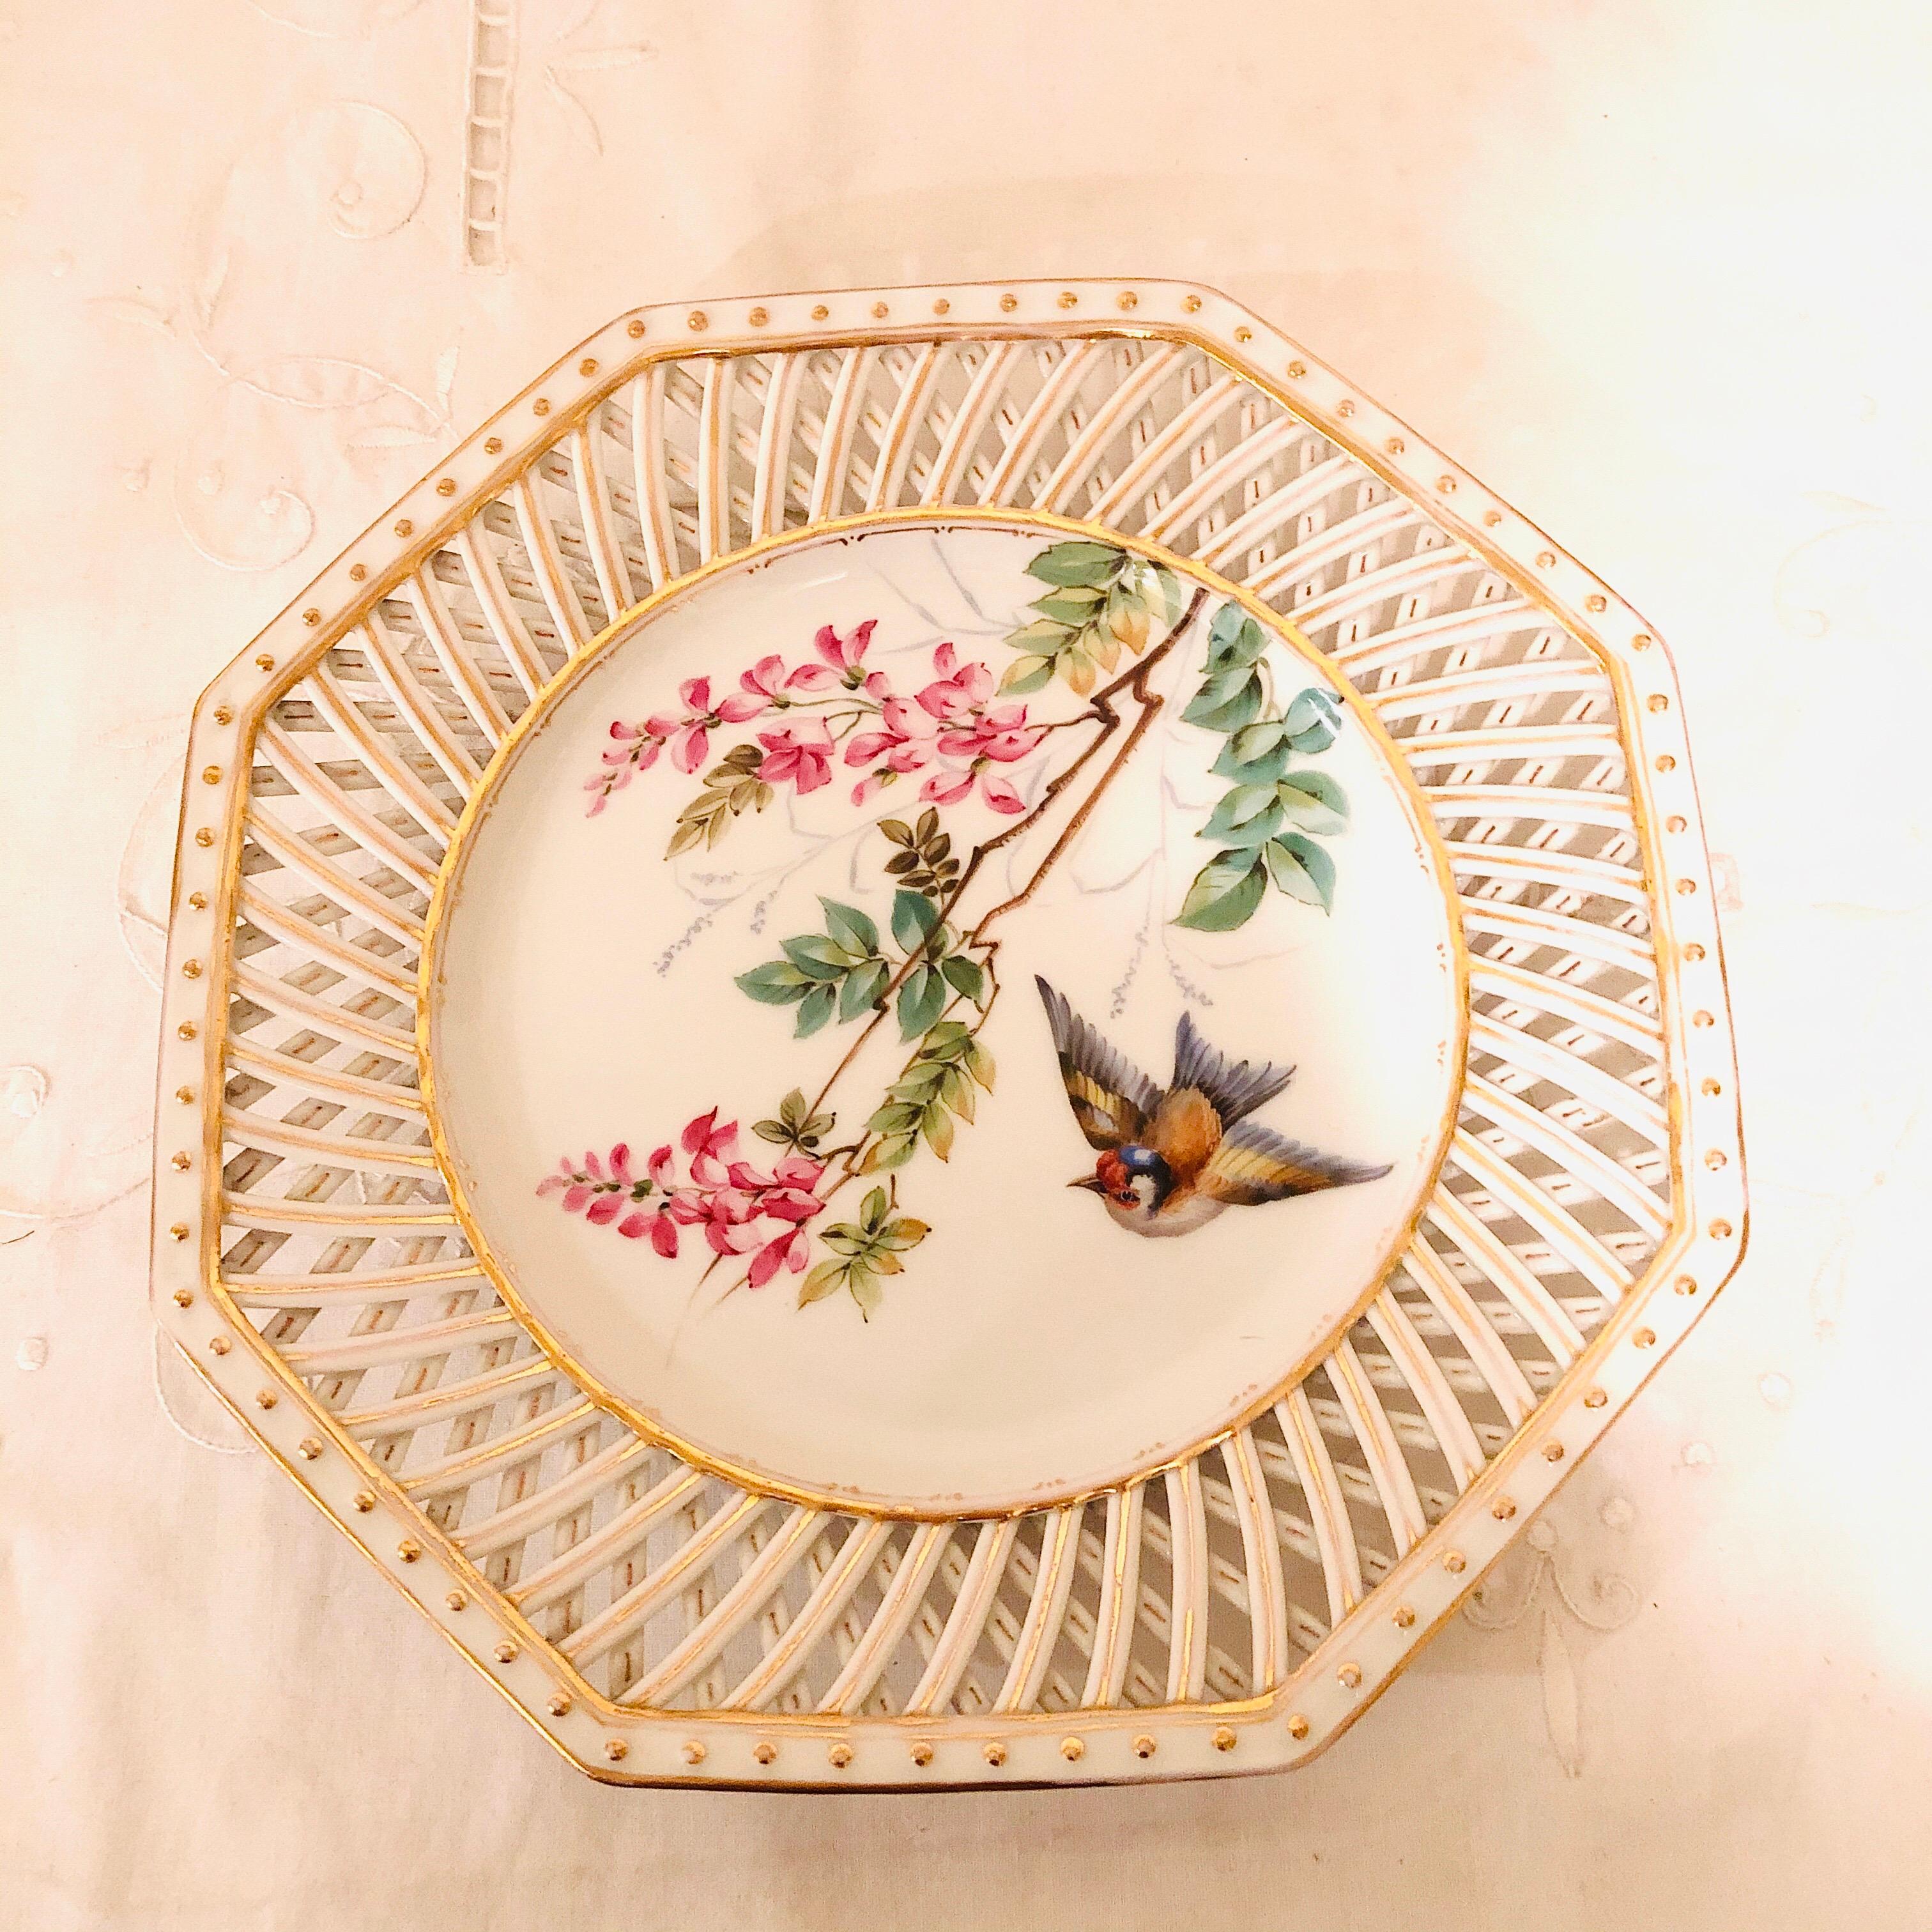 Hand-Painted Set of Twelve Pirkenhammer Reticulated Bird Plates Each Painted Differently